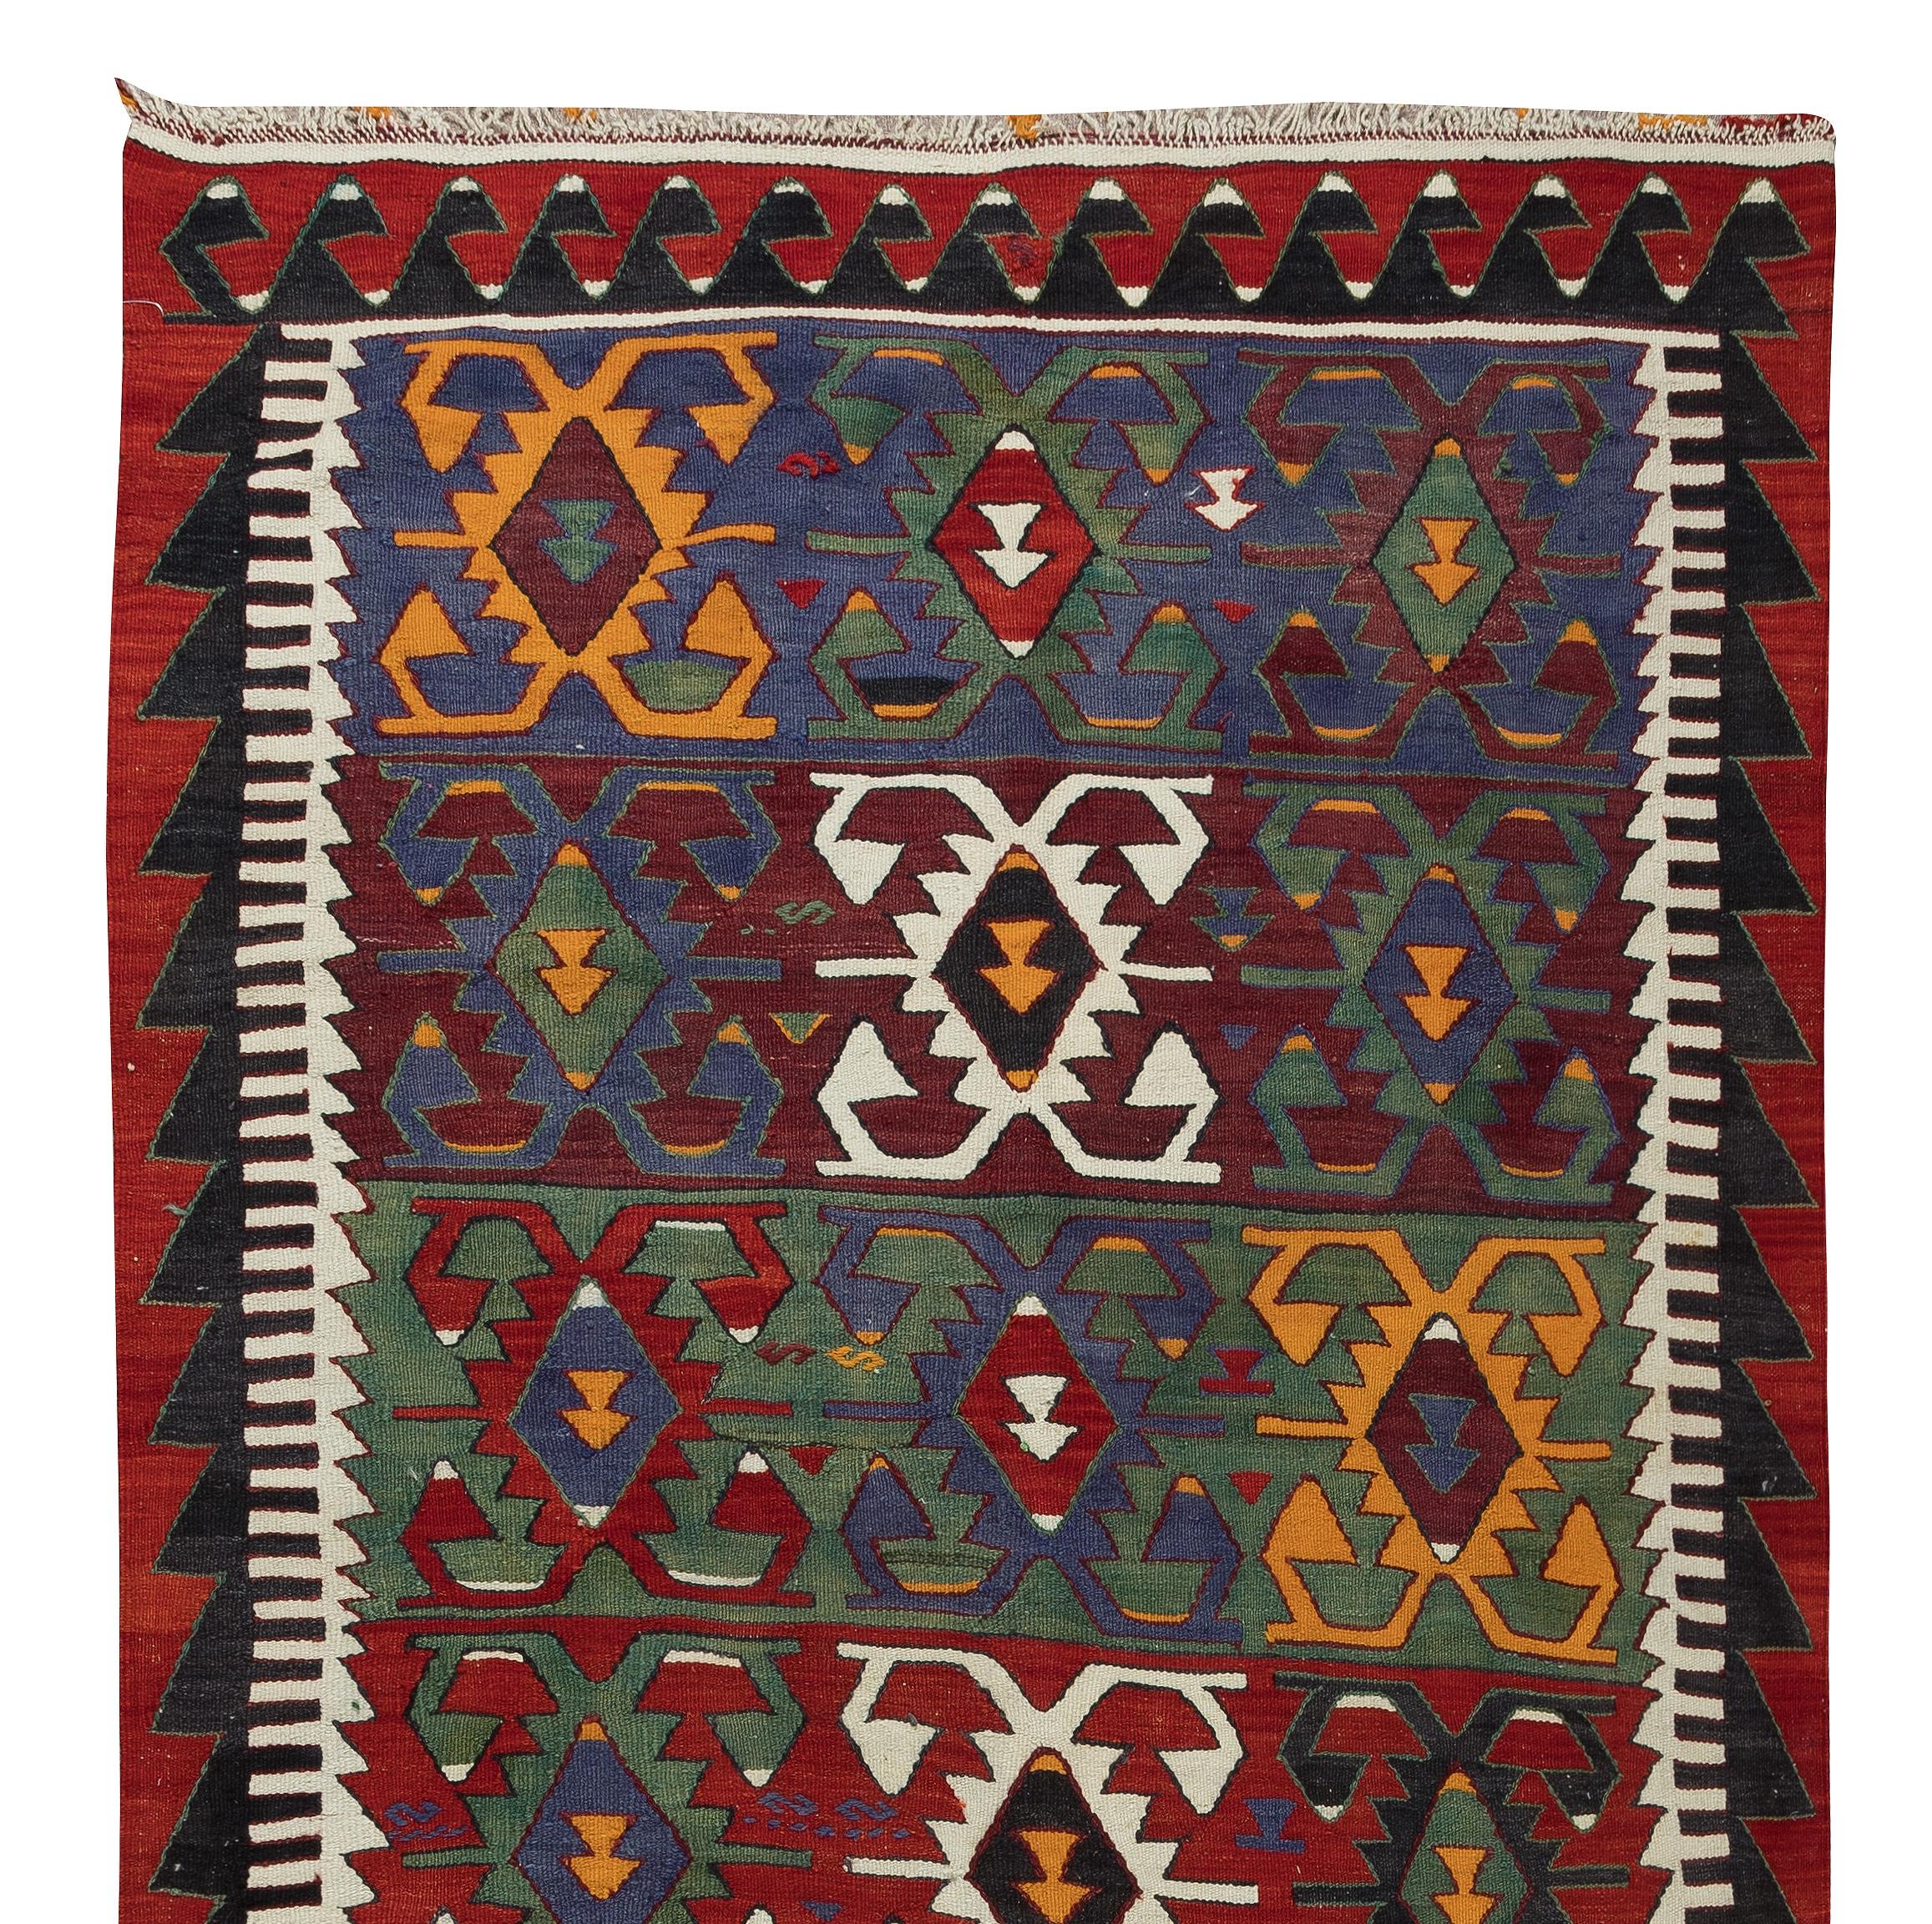 20th Century 5.4x10.8 Ft Colorful Vintage Hand-Woven Turkish Kilim, Flat-Weave Rug, 100% Wool For Sale